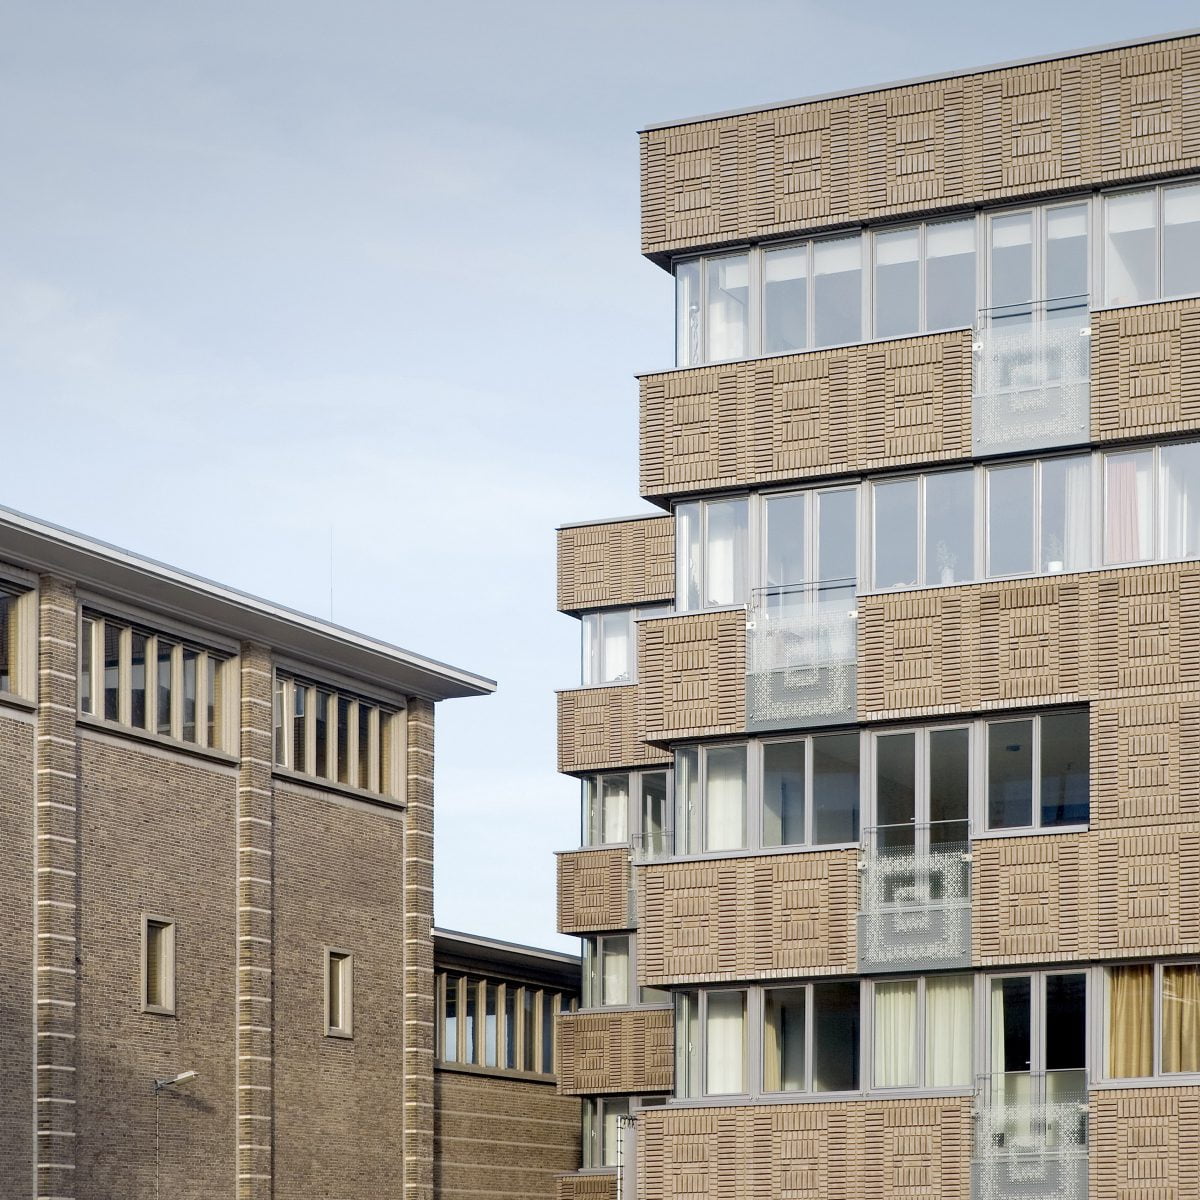 Marlies Rohmer, housing, commercial space, Bloemsingel, Groningen, Groningen Architecture Prize, masonry pattern, ornament, tile pattern, adapt old-new, prefab